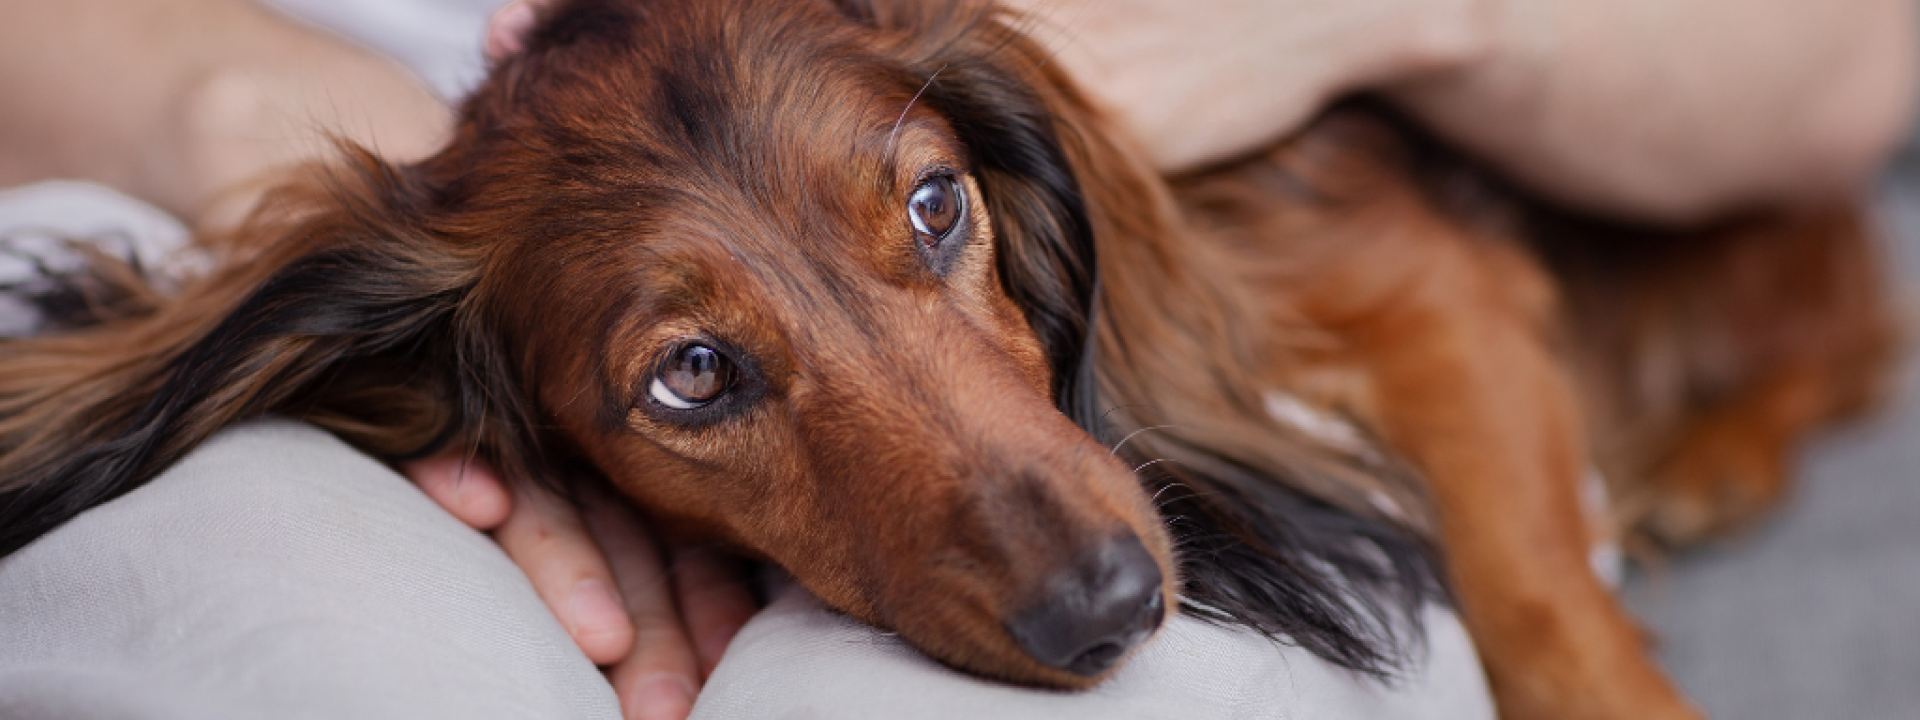 dachshund looks sad in the arms of the owner